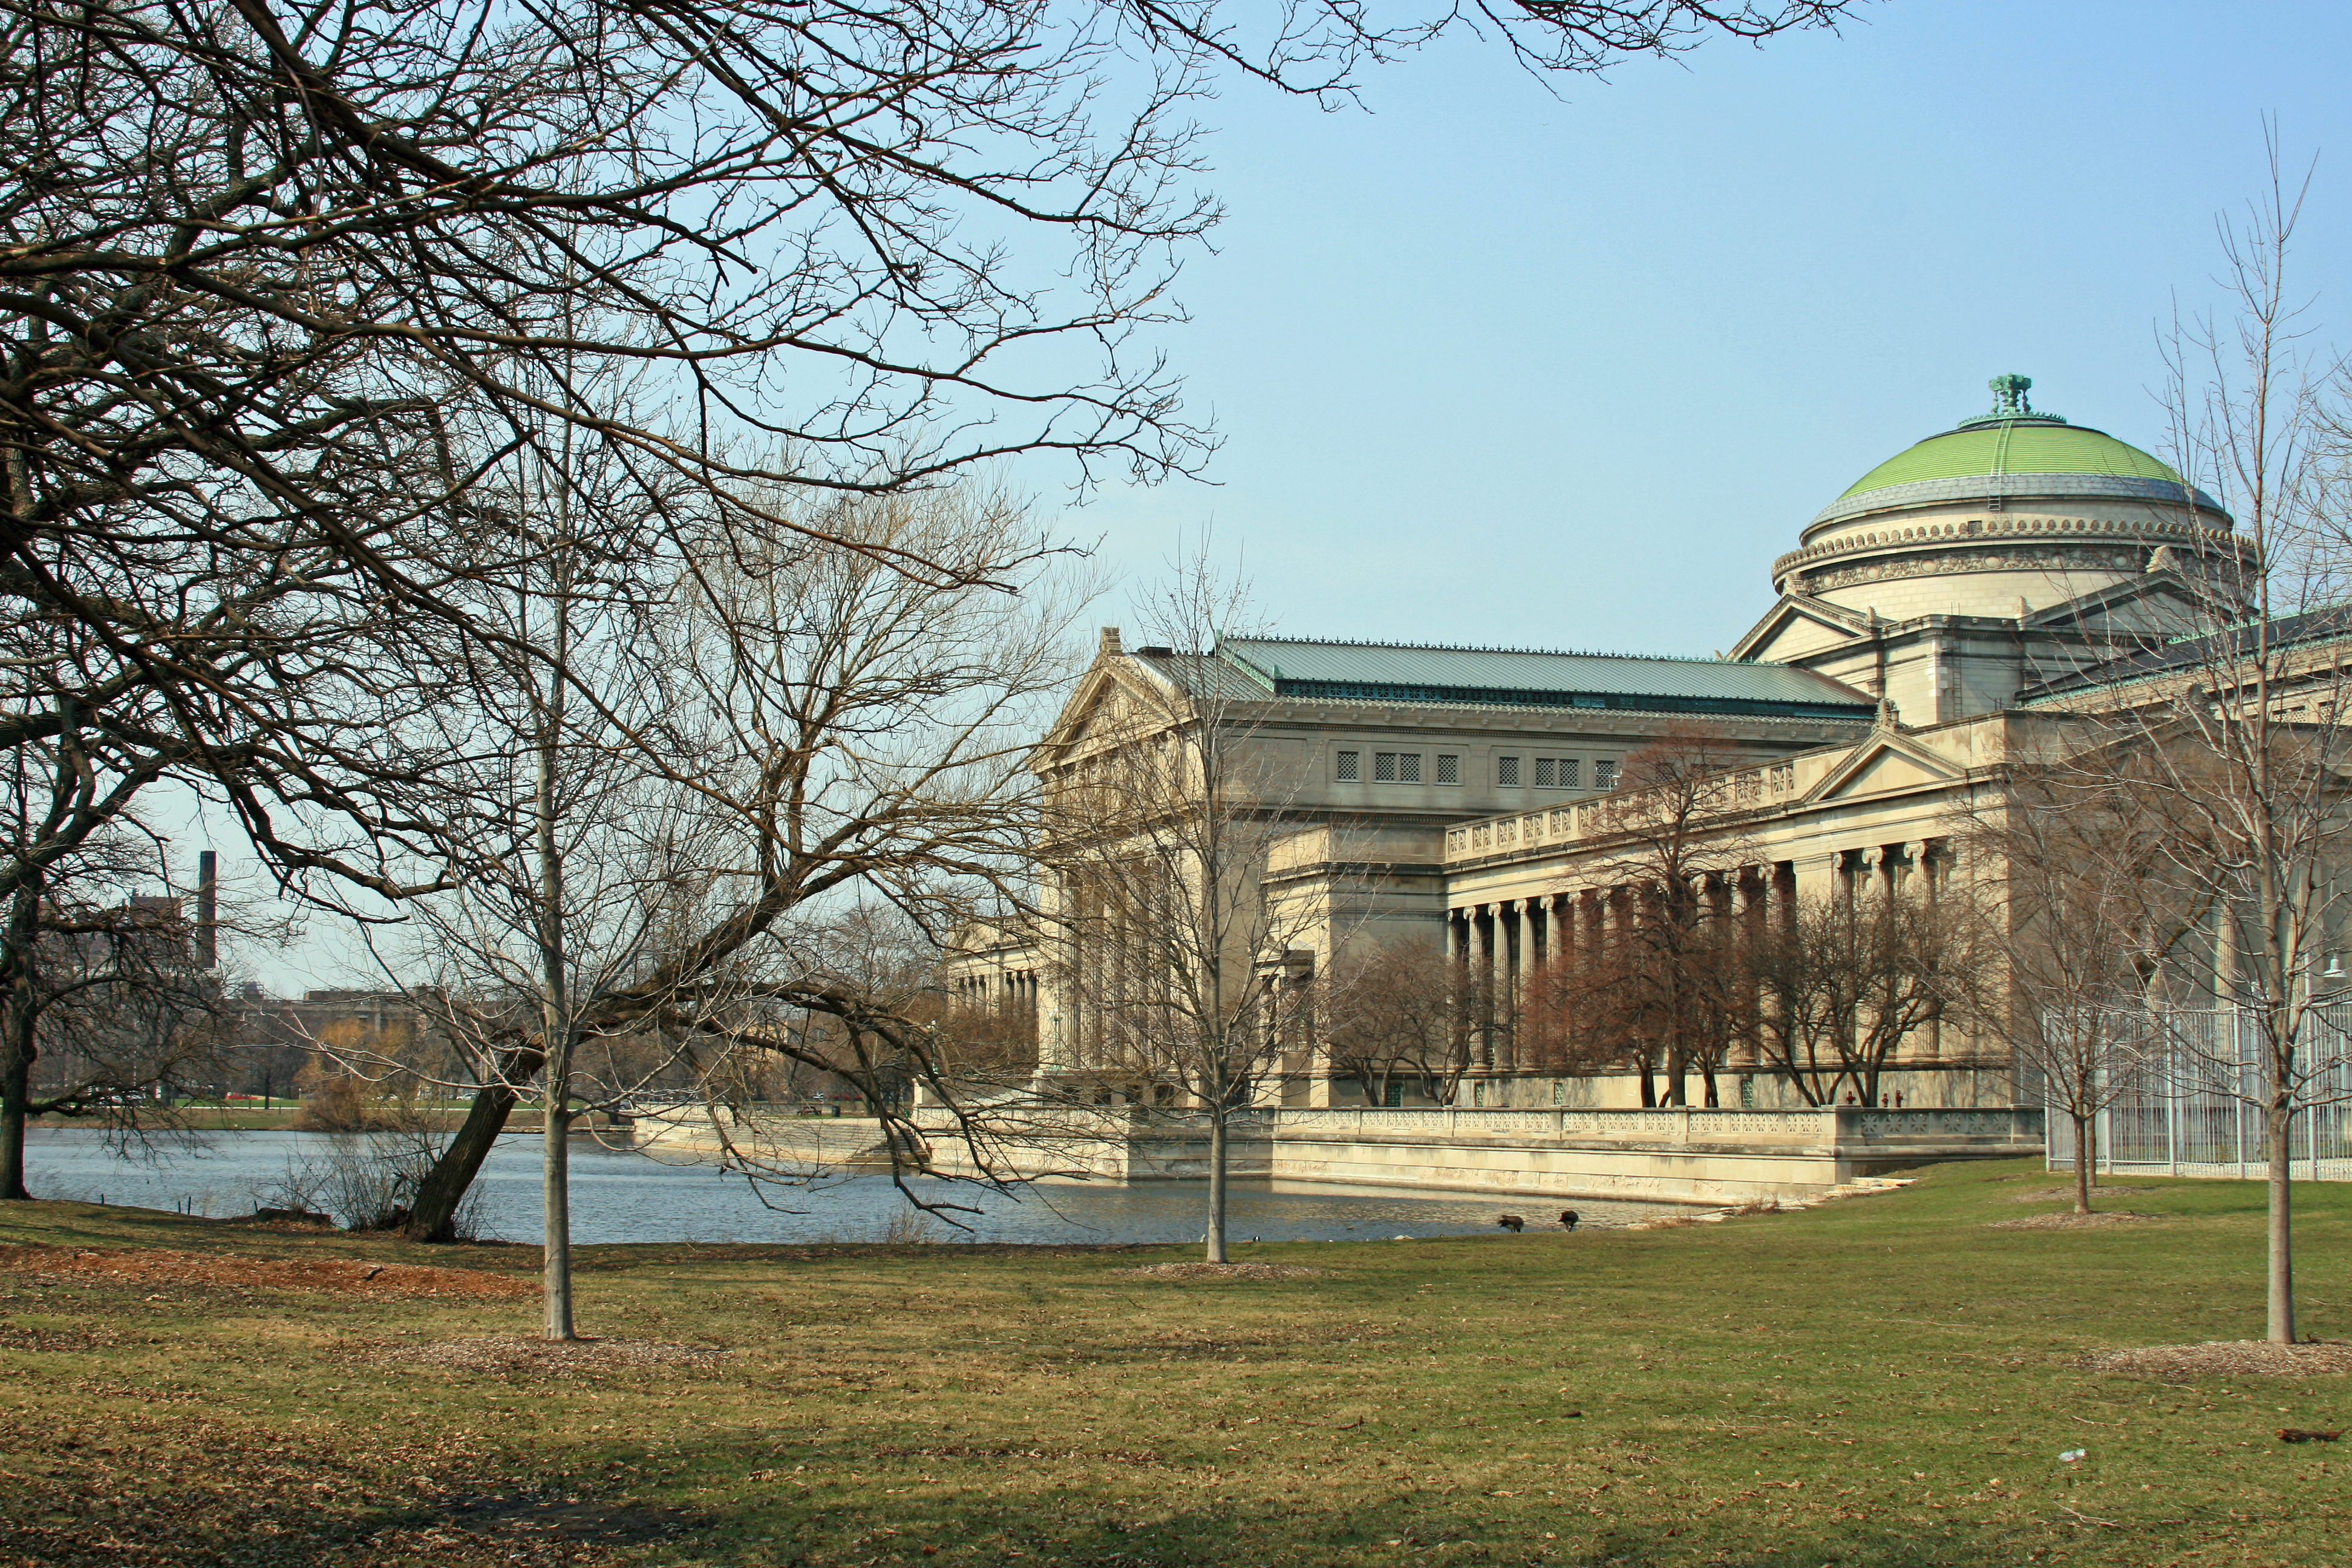 A stately building with a green dome sits in late afternoon sun overlooking a lagoon with grass and late fall trees without leaves.